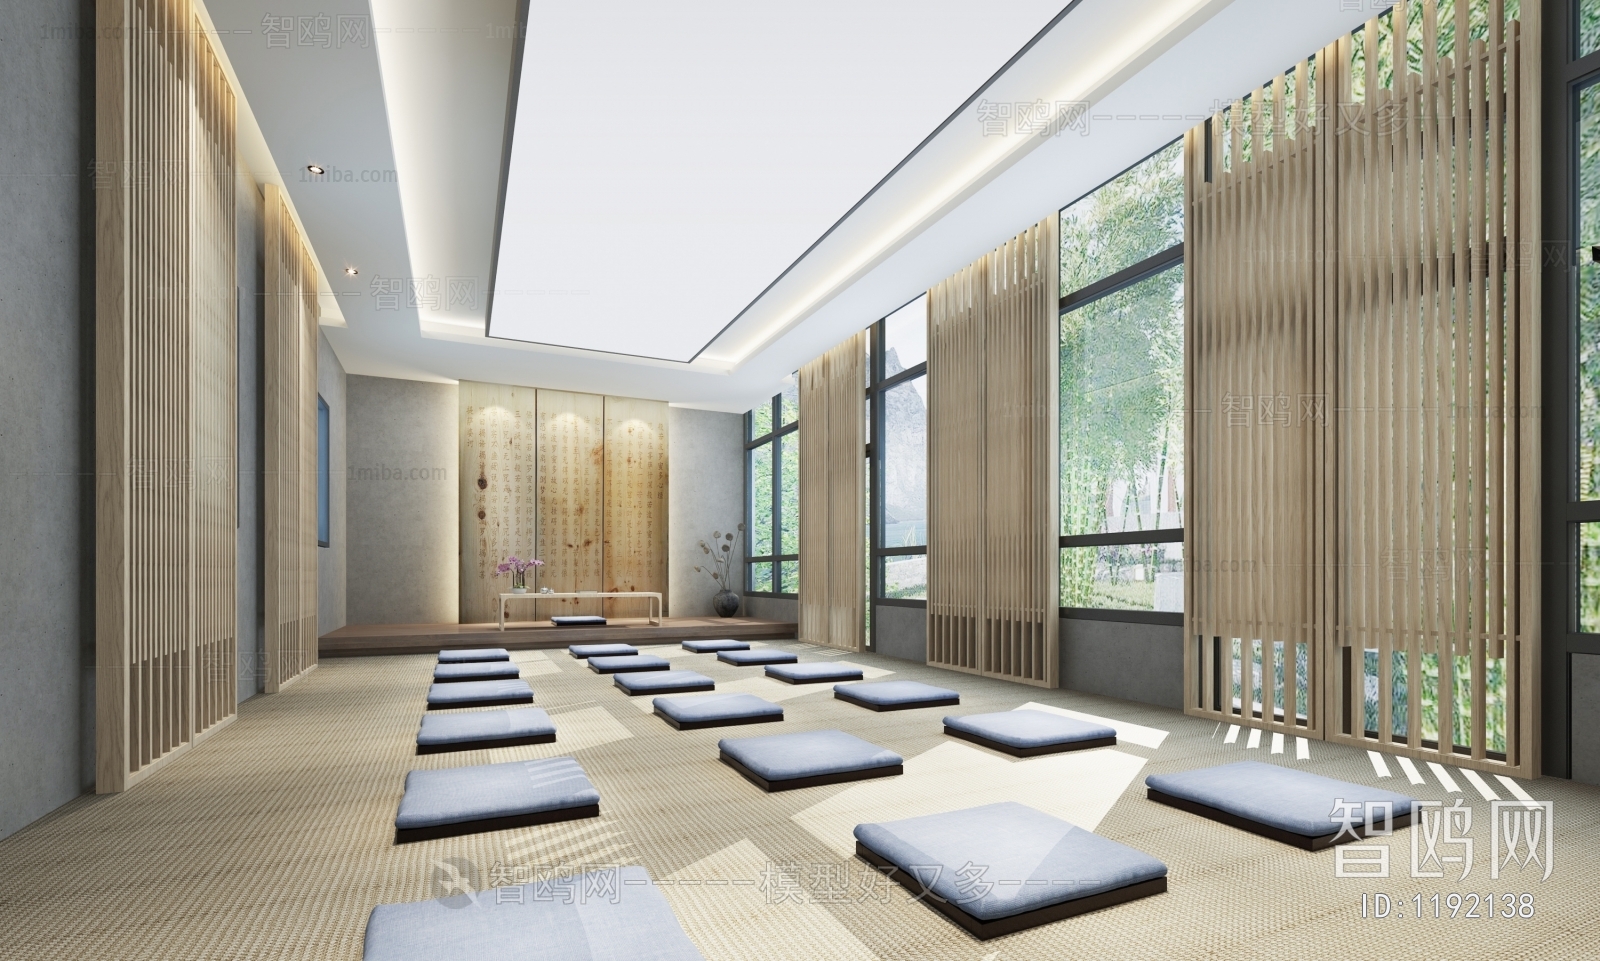 New Chinese Style Yoga Room